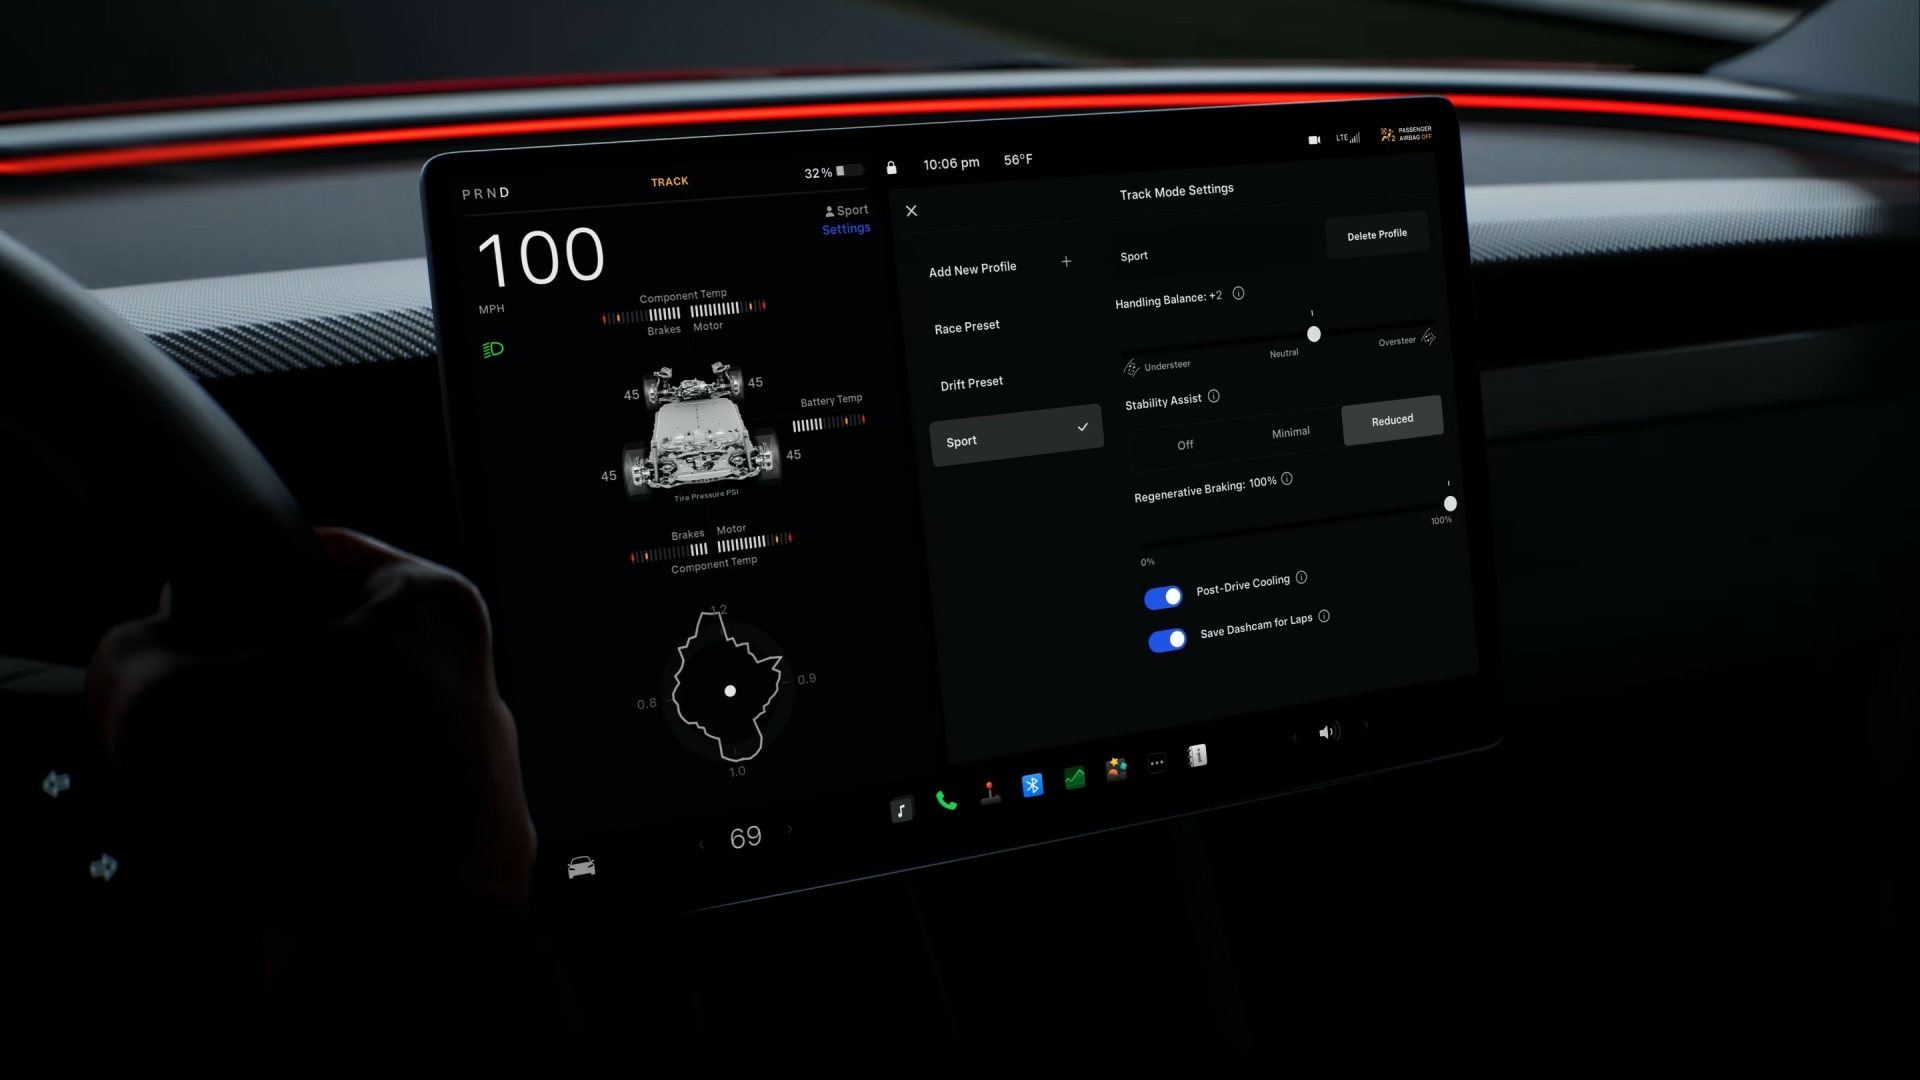 The Central Console Of The New Tesla Model 3 Performance (Credits Tesla)